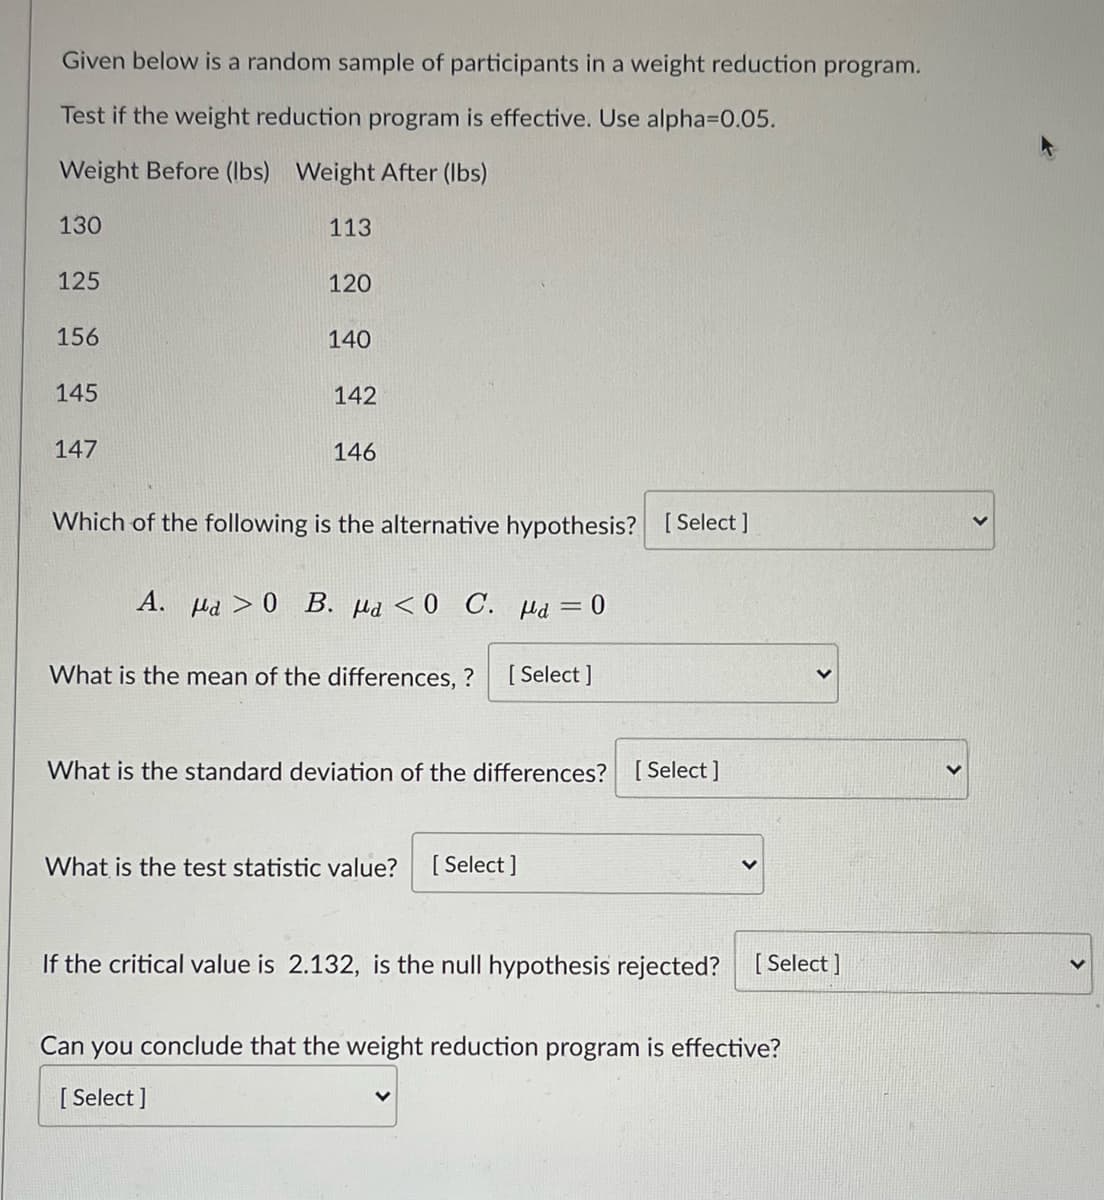 Given below is a random sample of participants in a weight reduction program.
Test if the weight reduction program is effective. Use alpha3D0.05.
Weight Before (Ibs) Weight After (Ibs)
130
113
125
120
156
140
145
142
147
146
Which of the following is the alternative hypothesis? [Select ]
A. Hd > 0 B. µd <0 C. Hd =0
What is the mean of the differences, ?
[ Select ]
What is the standard deviation of the differences?
[ Select ]
What is the test statistic value?
[ Select ]
If the critical value is 2.132, is the null hypothesis rejected? [Select ]
Can you conclude that the weight reduction program is effective?
[ Select ]
>
